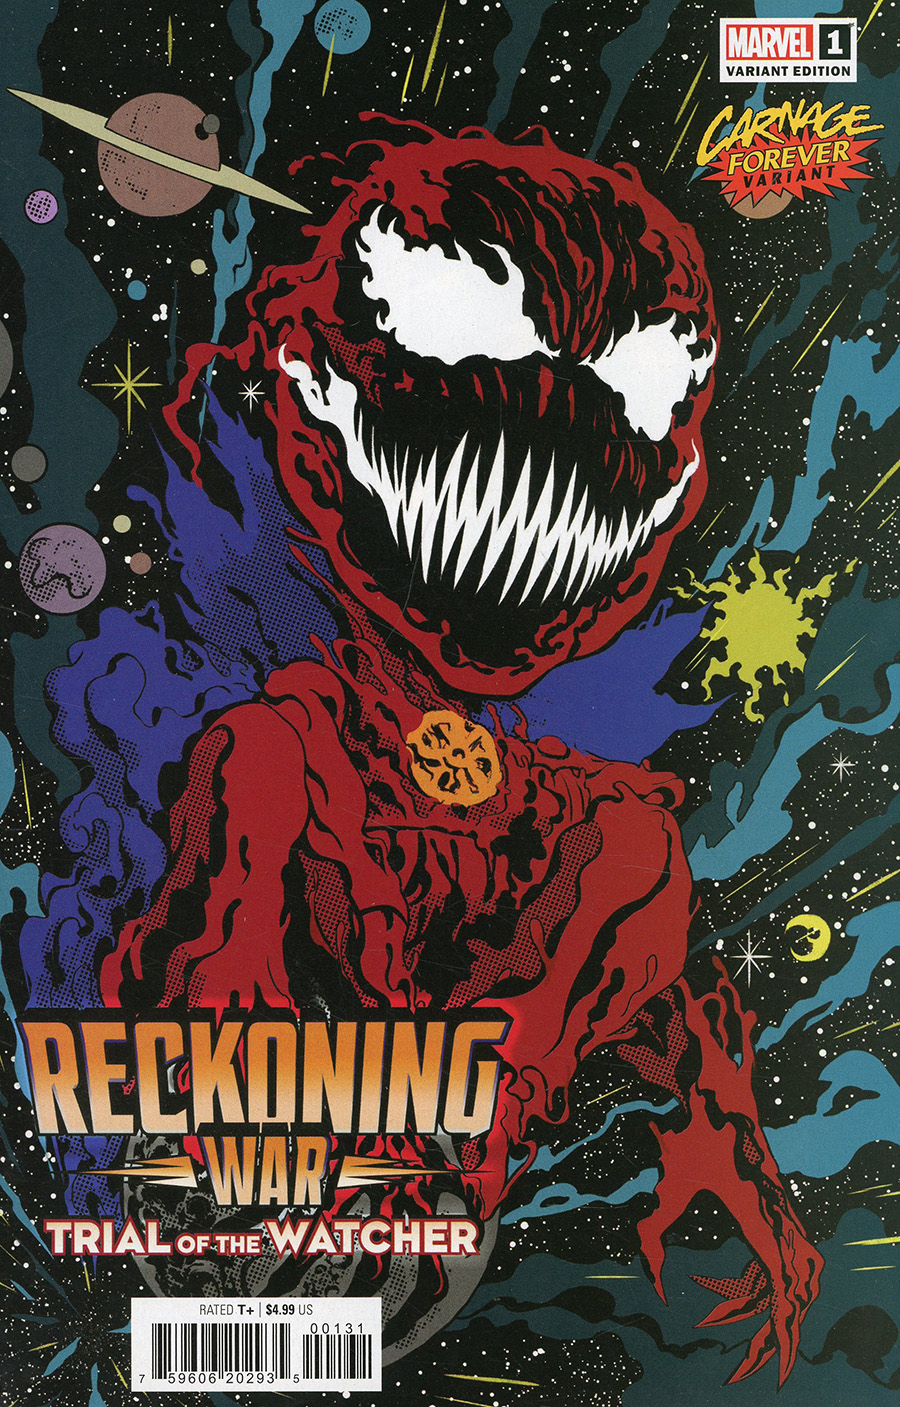 Reckoning War Trial Of The Watcher #1 (One Shot) Cover B Variant Javier Rodriguez Carnage Forever Cover